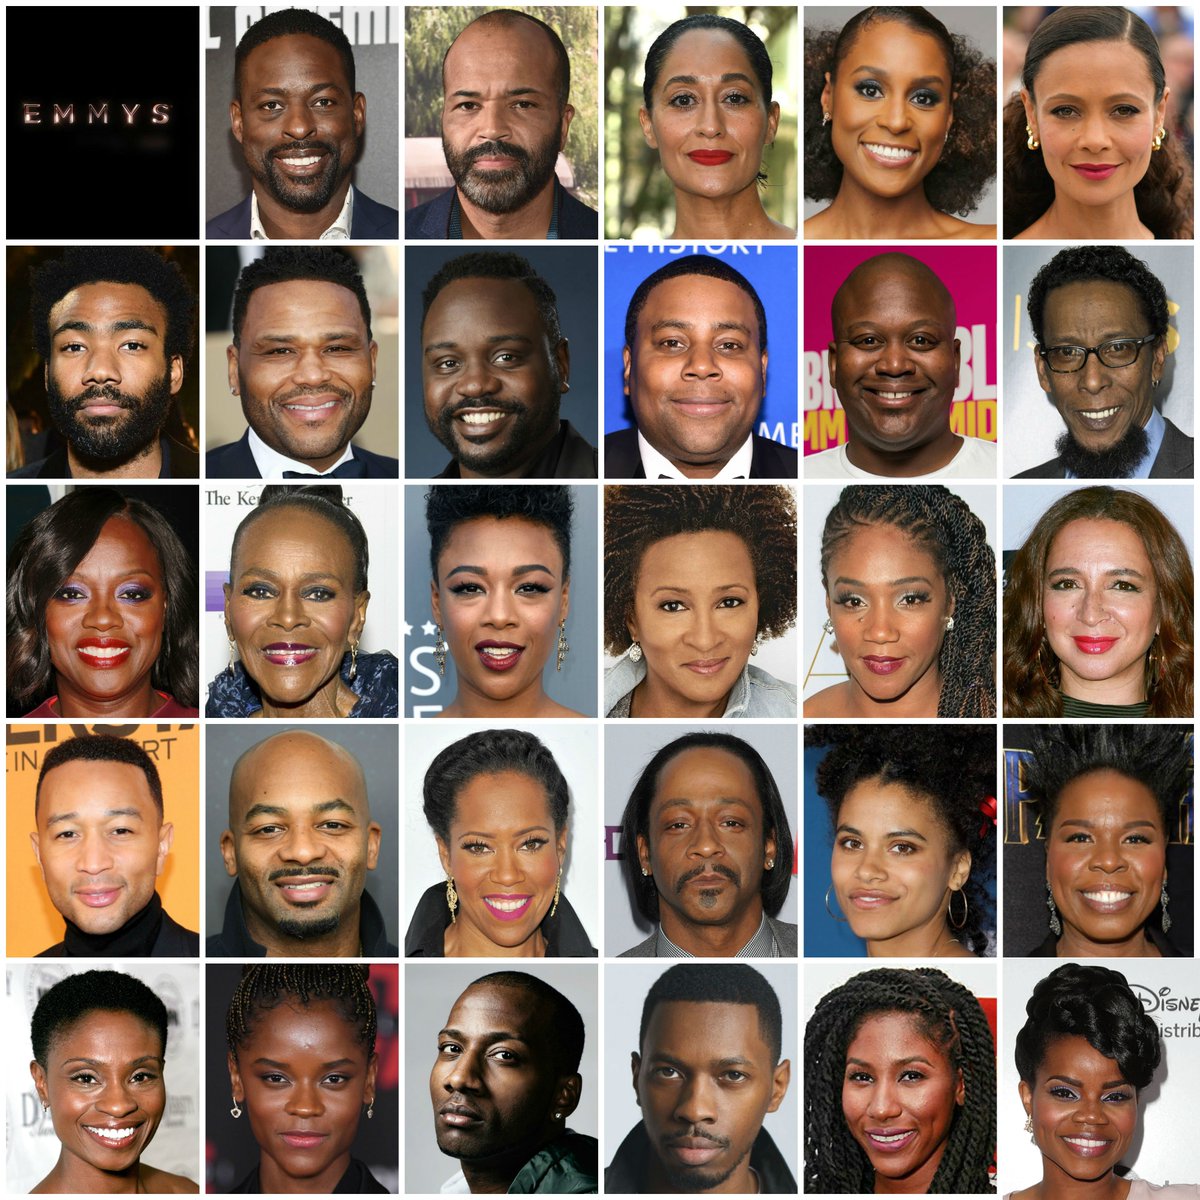 RT @MMXLII: Black actors shattered the record of Emmy nominations this year! #MMXLII https://t.co/70zIO4jQzw https://t.co/5XnoJAv84d